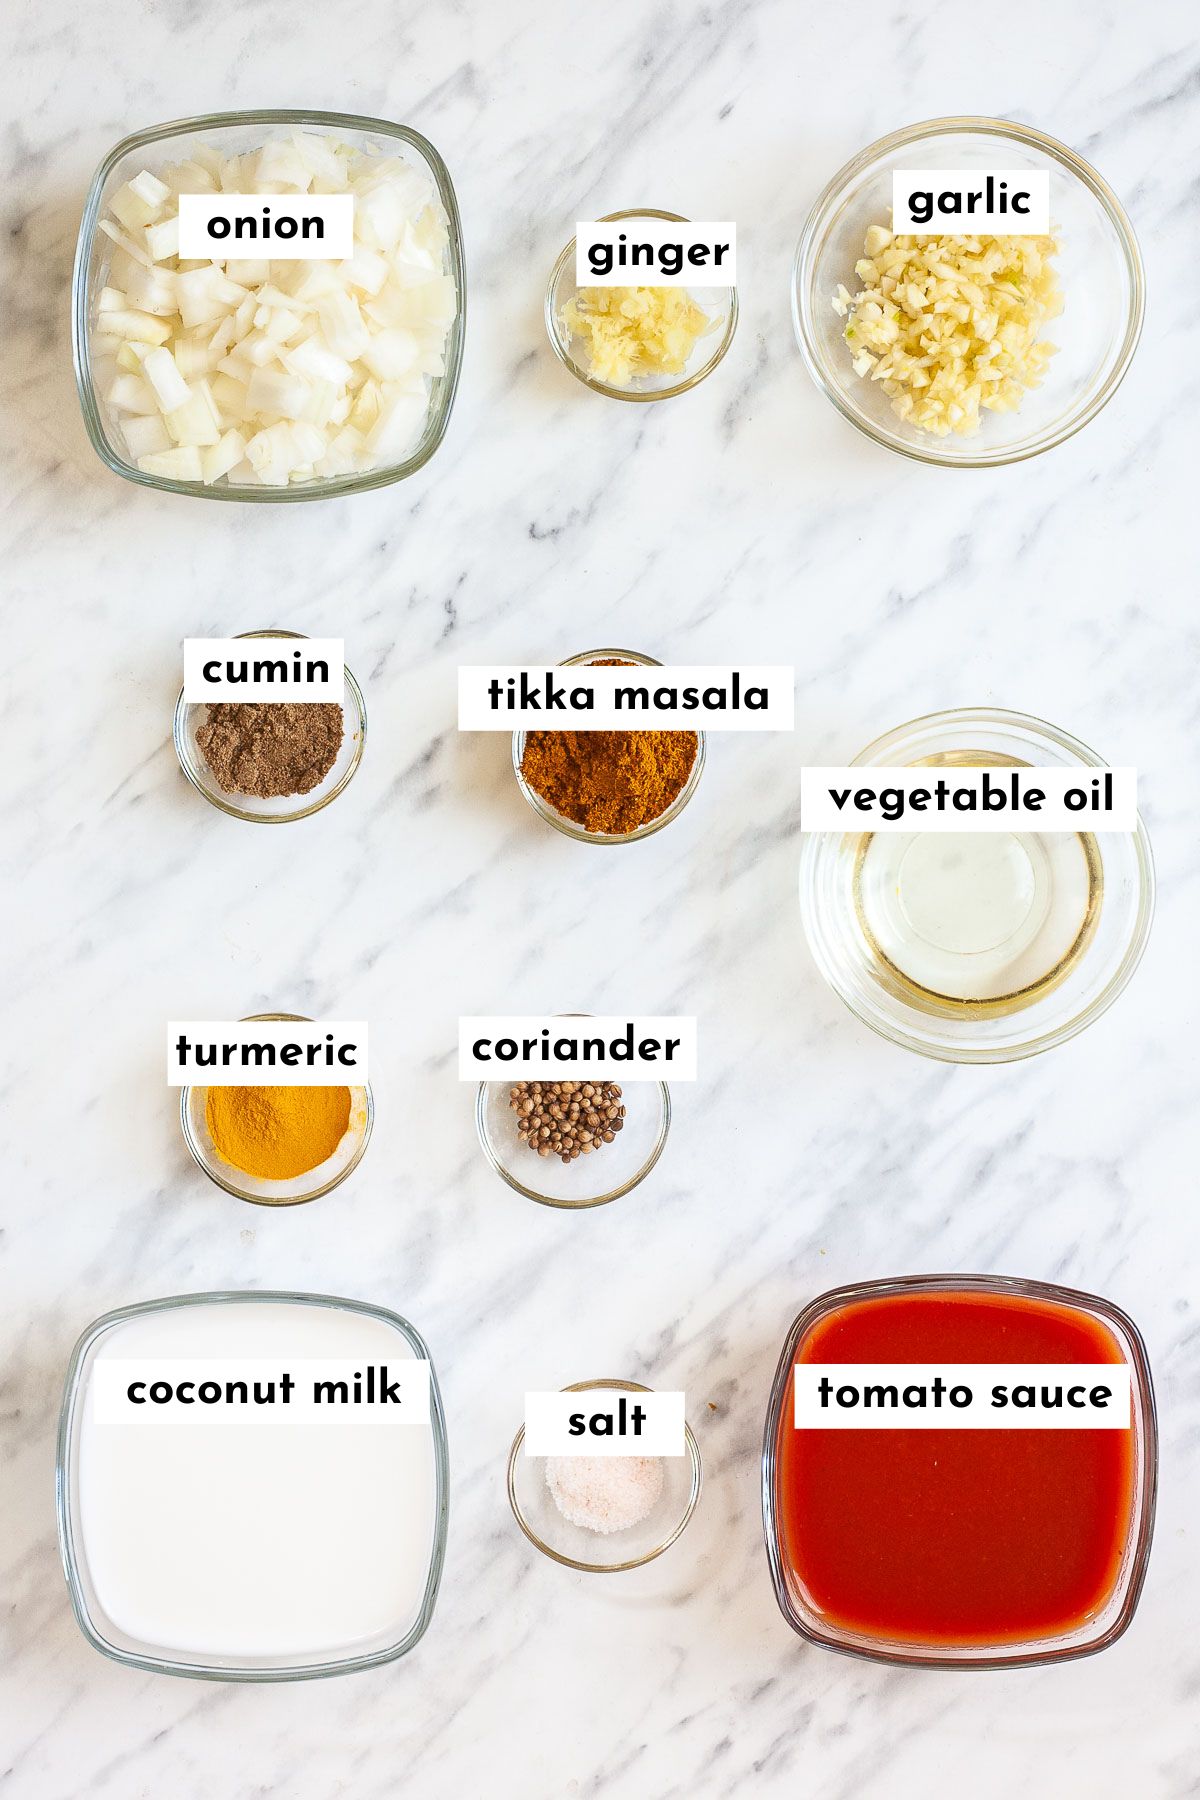 Ingredients of vegan tikka masala sauce placed in small glass bowls like chopped onion, minced garlic and ginger, different brown and yellow spices, red tomato sauce, thick white sauce, and oil